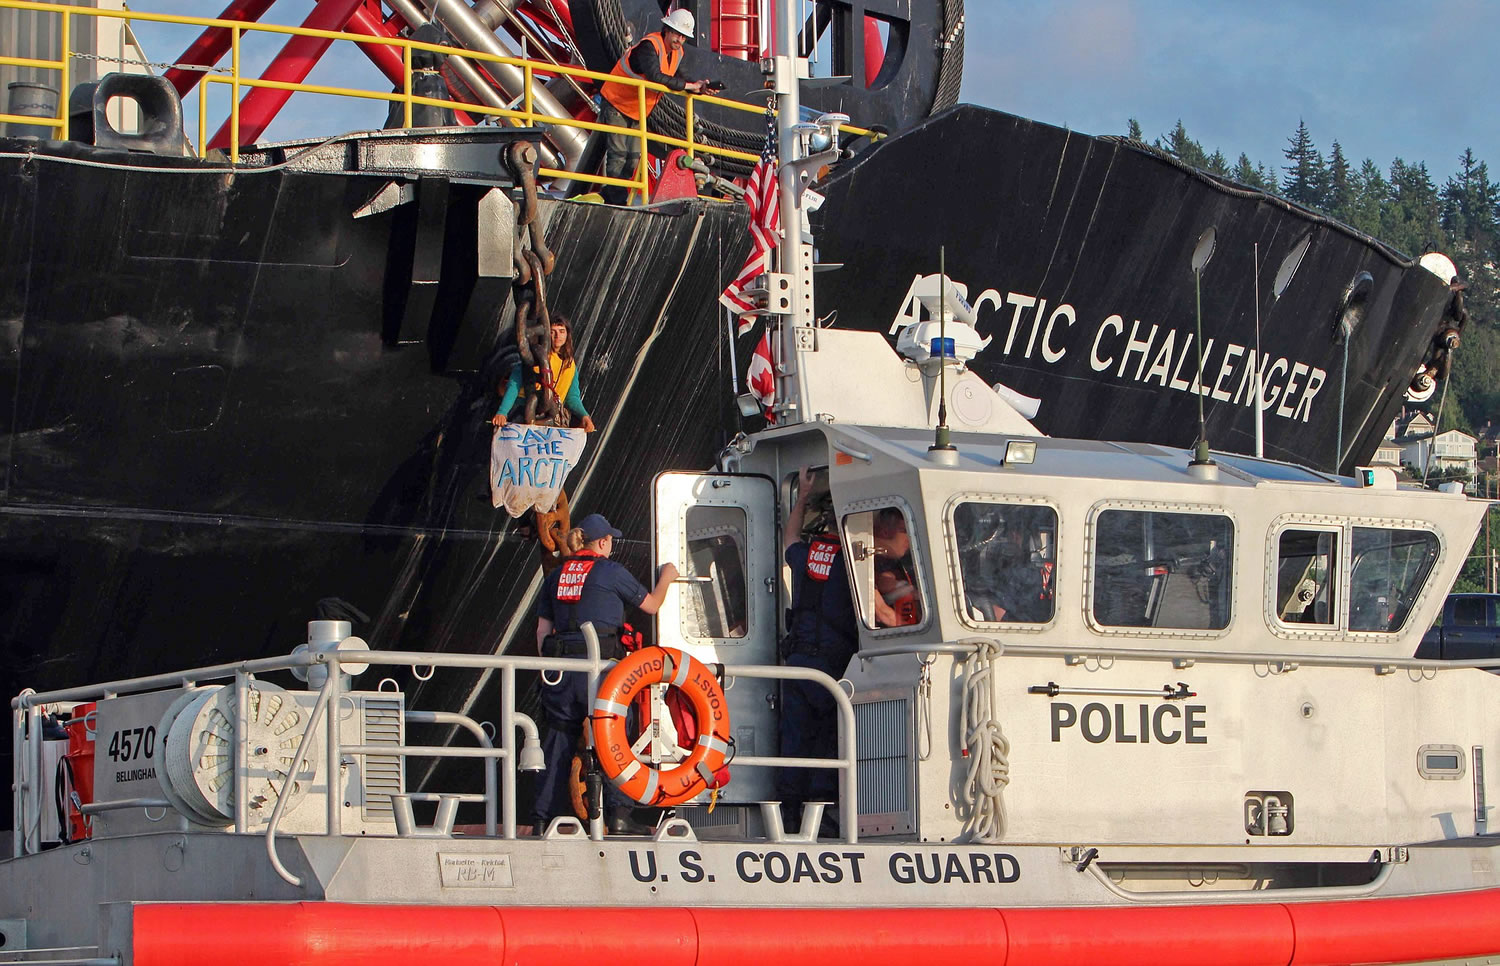 The Coast Guard stands by as a woman identified as Chiara D?Angelo has suspended herself Friday in a climbing harness from the anchor chain of the Royal Dutch Shell support ship Arctic Challenger in the harbor at Bellingham.